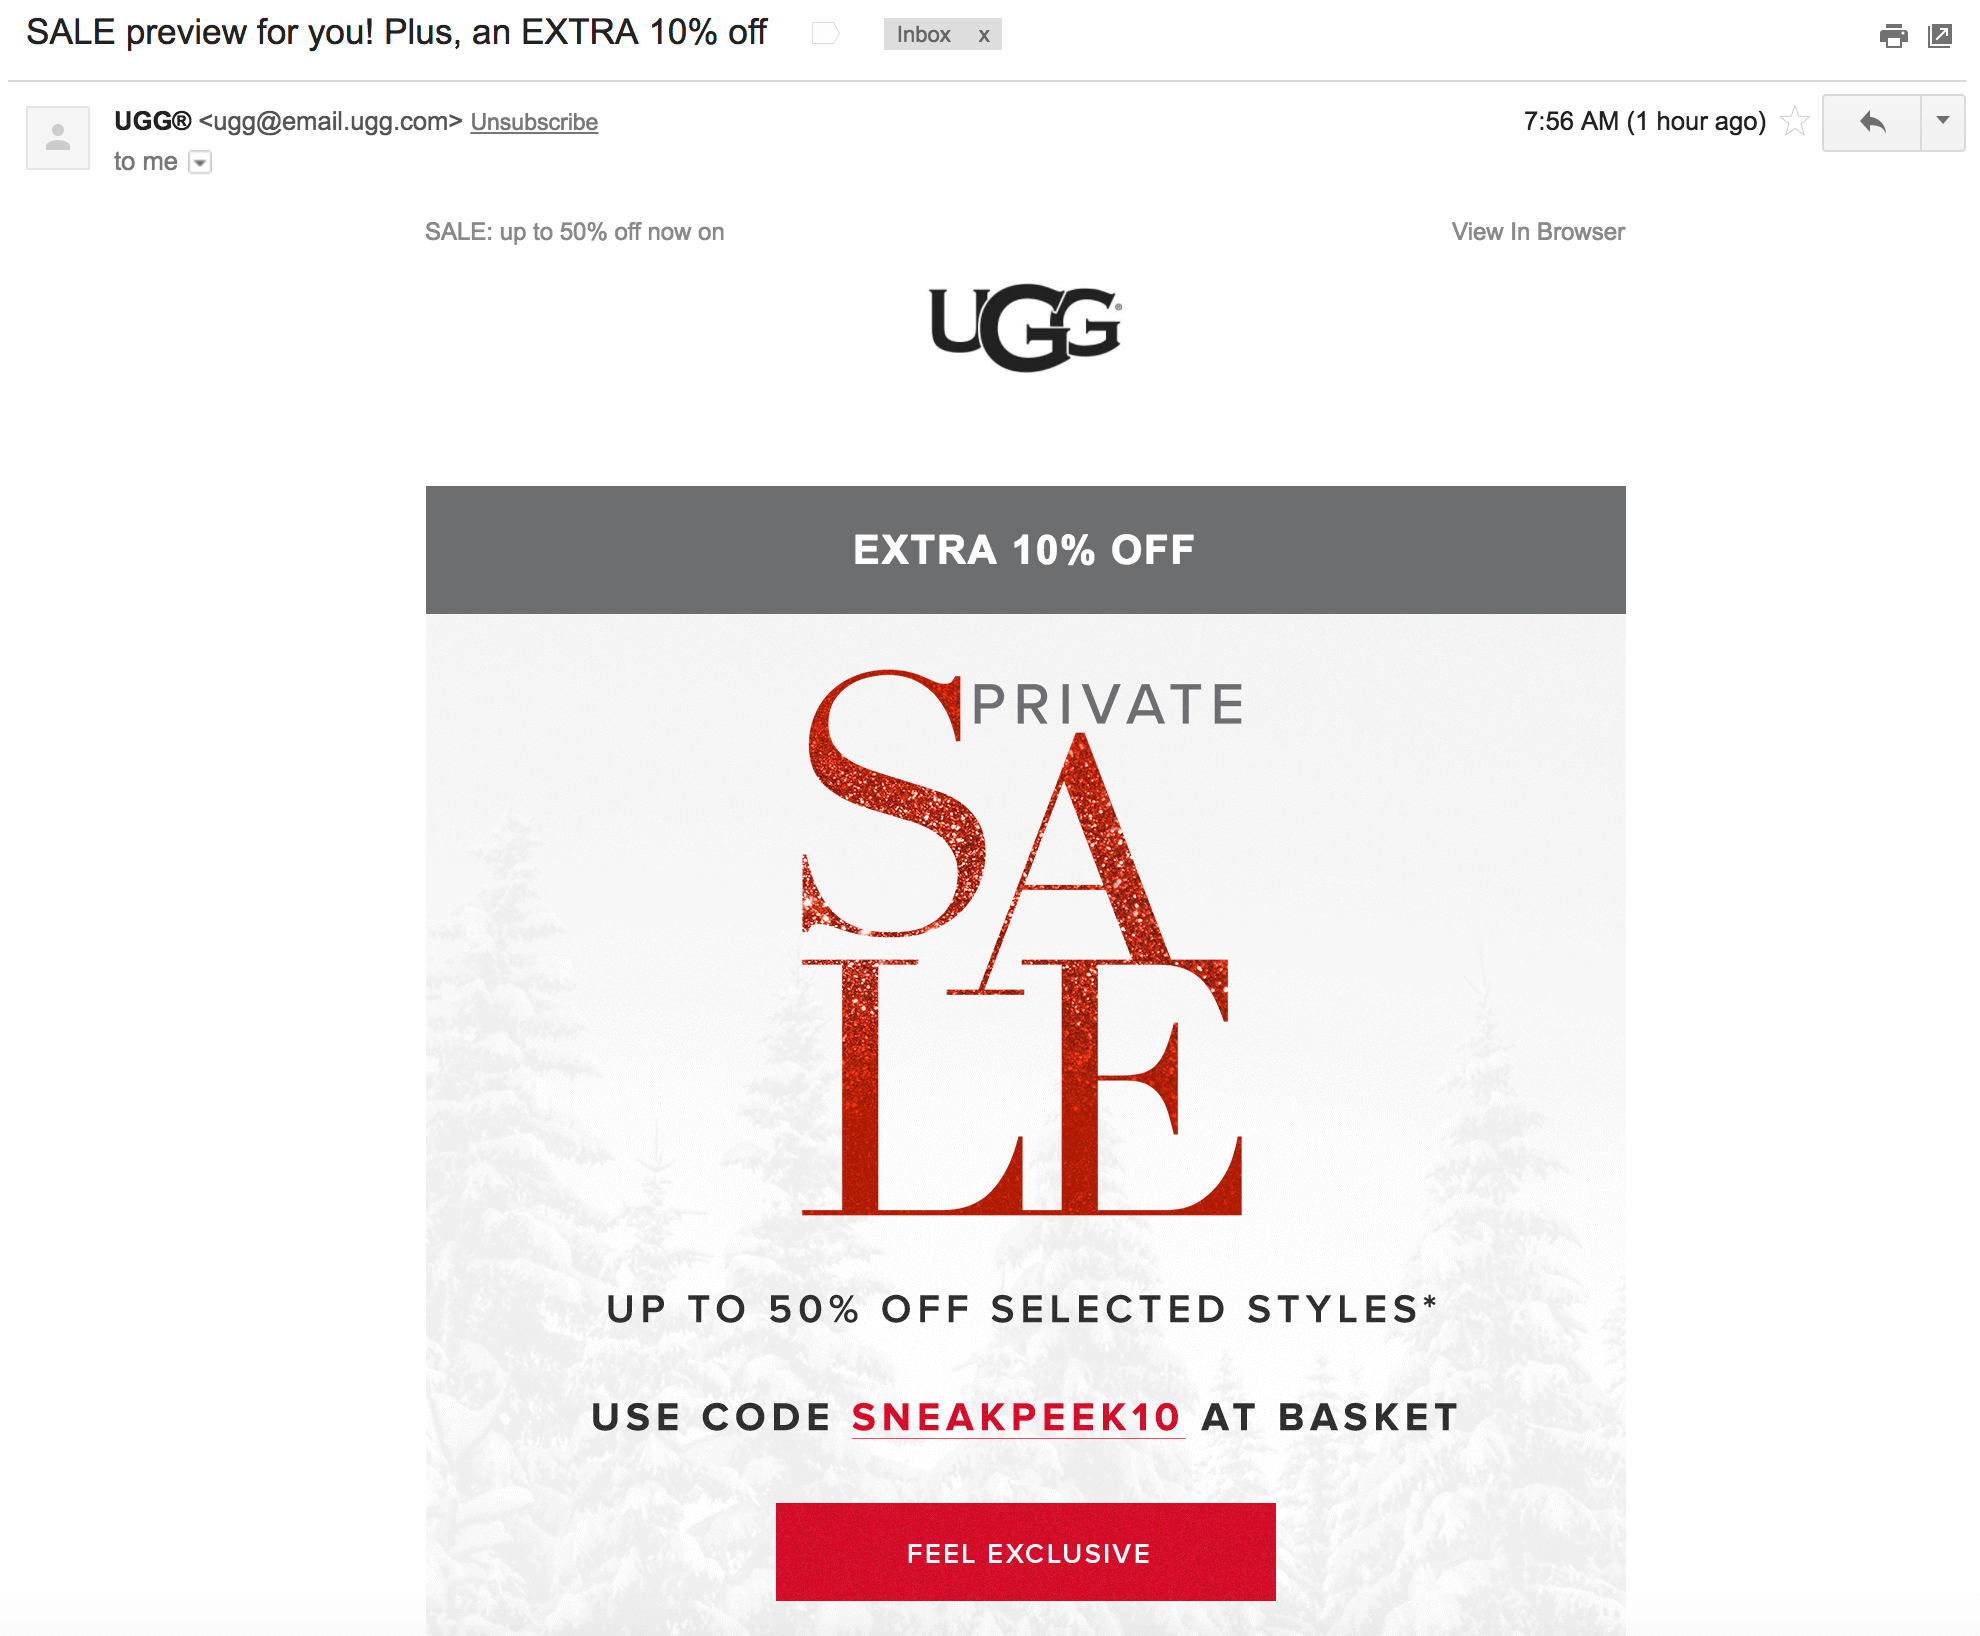 Screenshot showing a sale email by Ugg